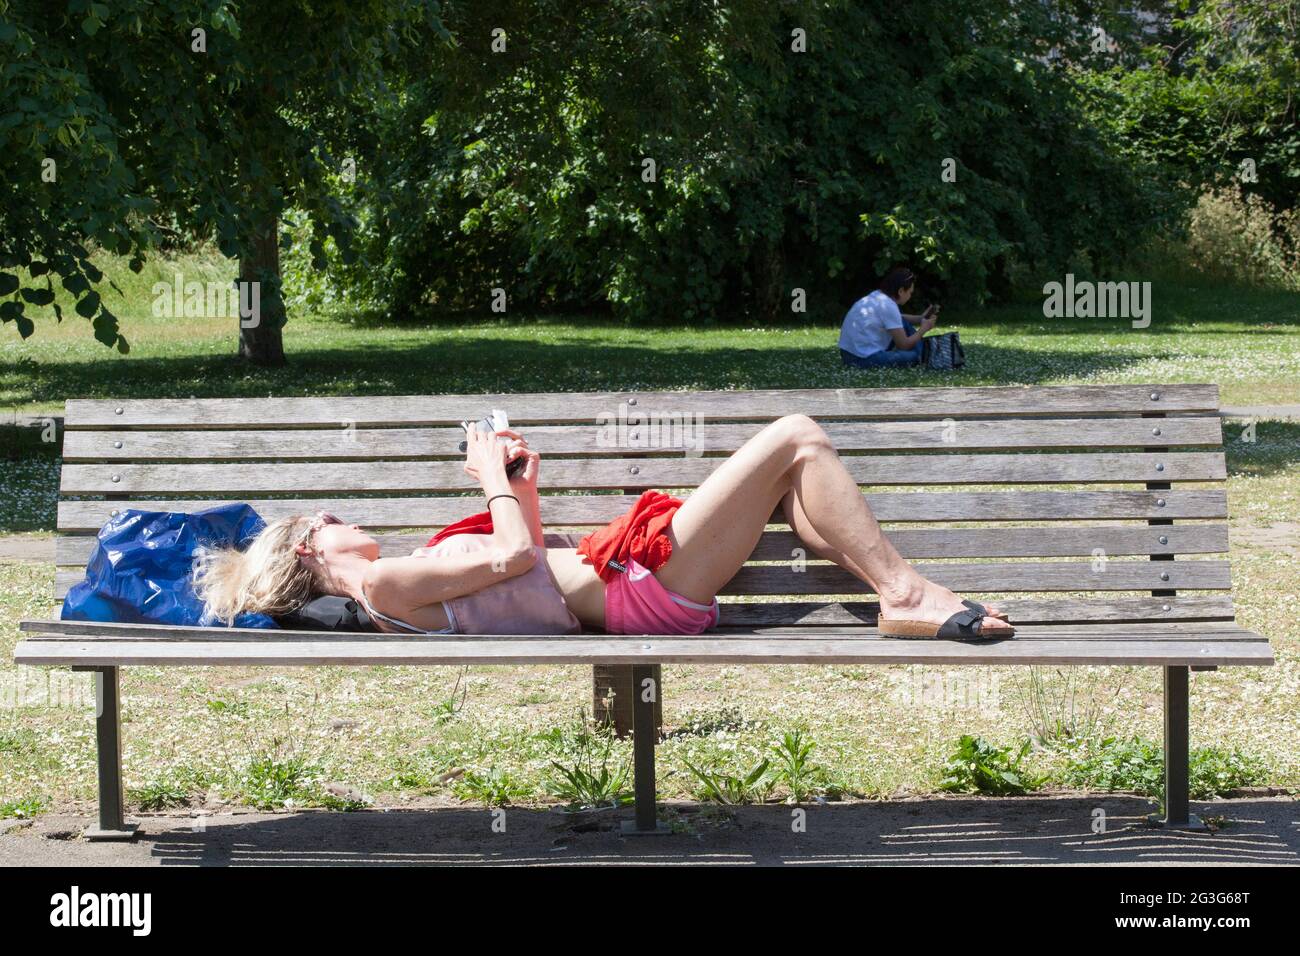 UK Weather, London: on the hottest day of the year so far, with temperatures expected to reach 29 centigrade, Londoners use Regent's Park to cool off or enjoy the sun. Some go on the pedallos, others hire a deckchair or grab a bench. Some are in bikinis, others fully clothed and even with face masks on outdoors. A cooling breeze makes the sun bearable but many stay in the shade. Anna Watson/Alamy Live News Stock Photo